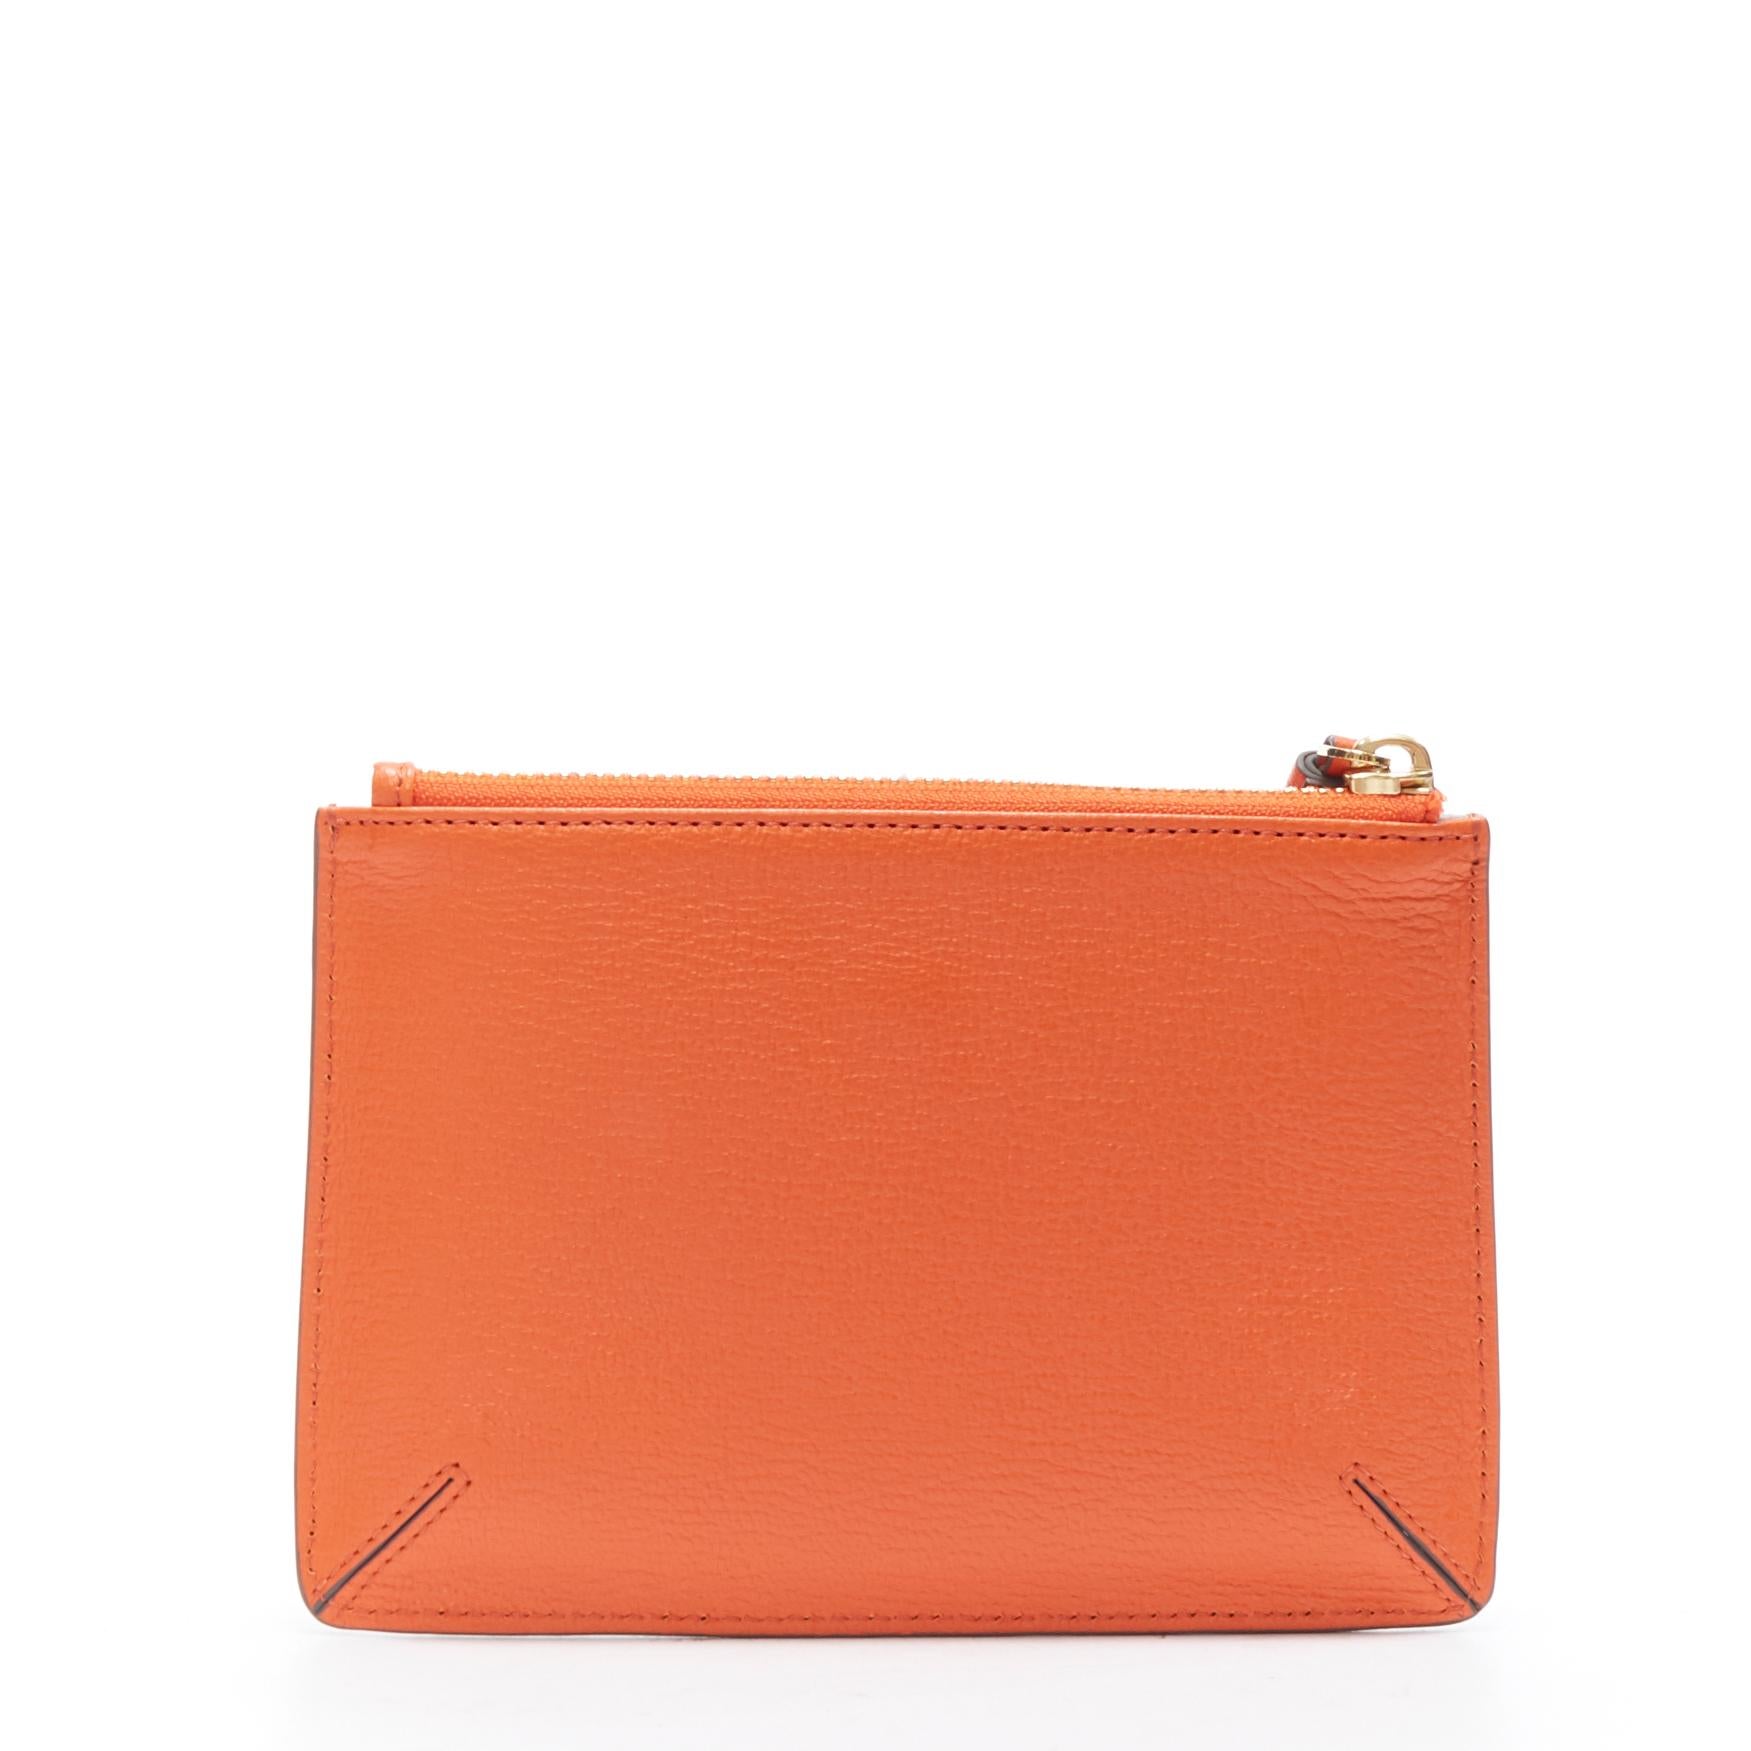 new ANYA HINDMARCH Ouch bandage orange leather top tassel zip pouch bag 
Reference: LNKO/A01235 
Brand: Anya Hindmarch 
Designer: Anya Hindmarch 
Material: Leather 
Color: Orange 
Pattern: Solid 
Closure: Zip 
Made in: Italy 

CONDITION: 
Condition: